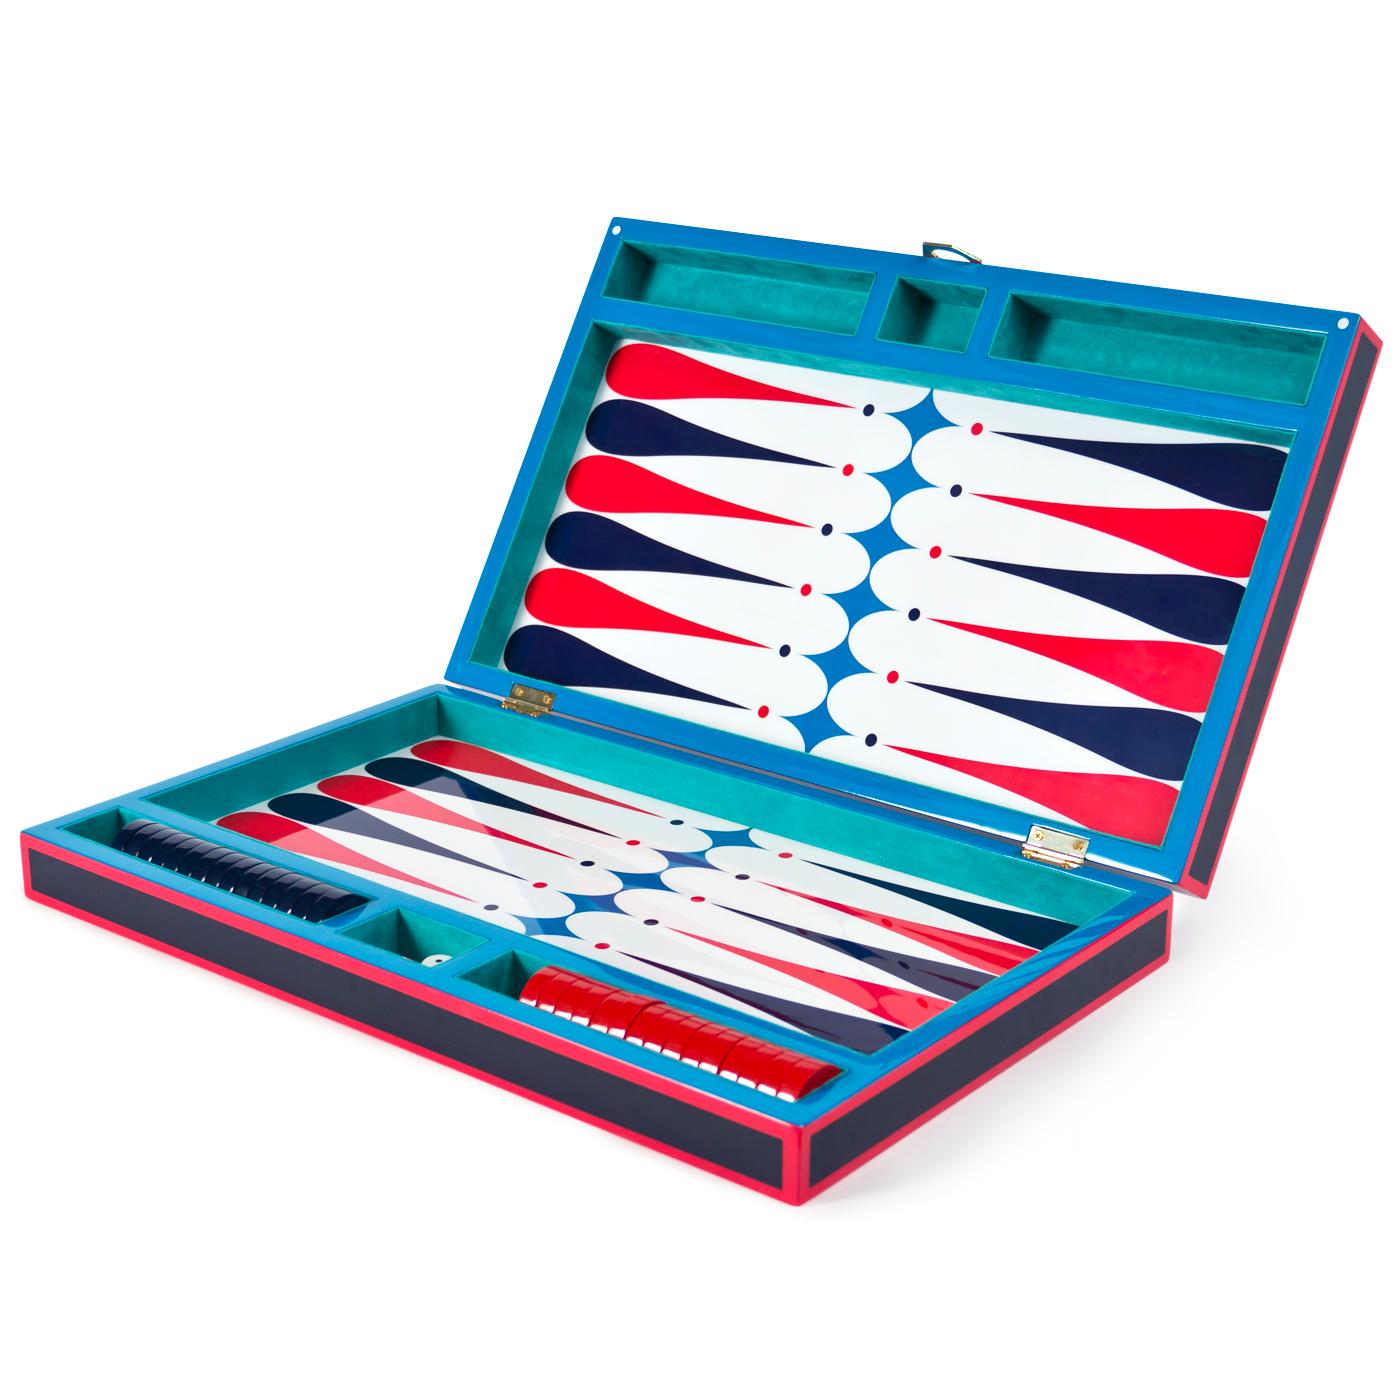 American Backgammon Set in Navy and Red Lacquer